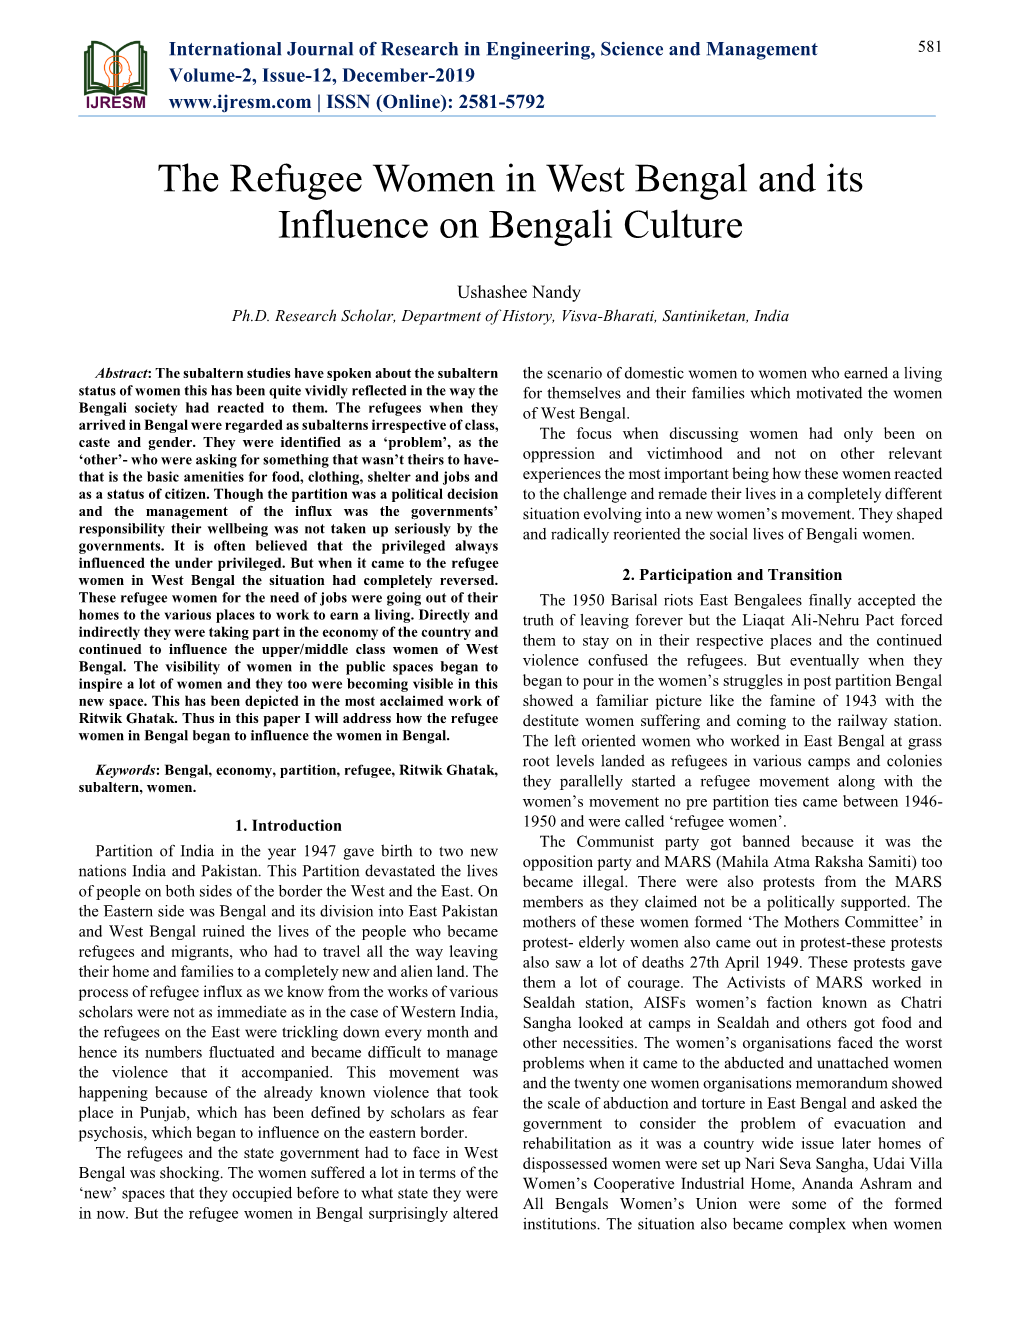 The Refugee Women in West Bengal and Its Influence on Bengali Culture